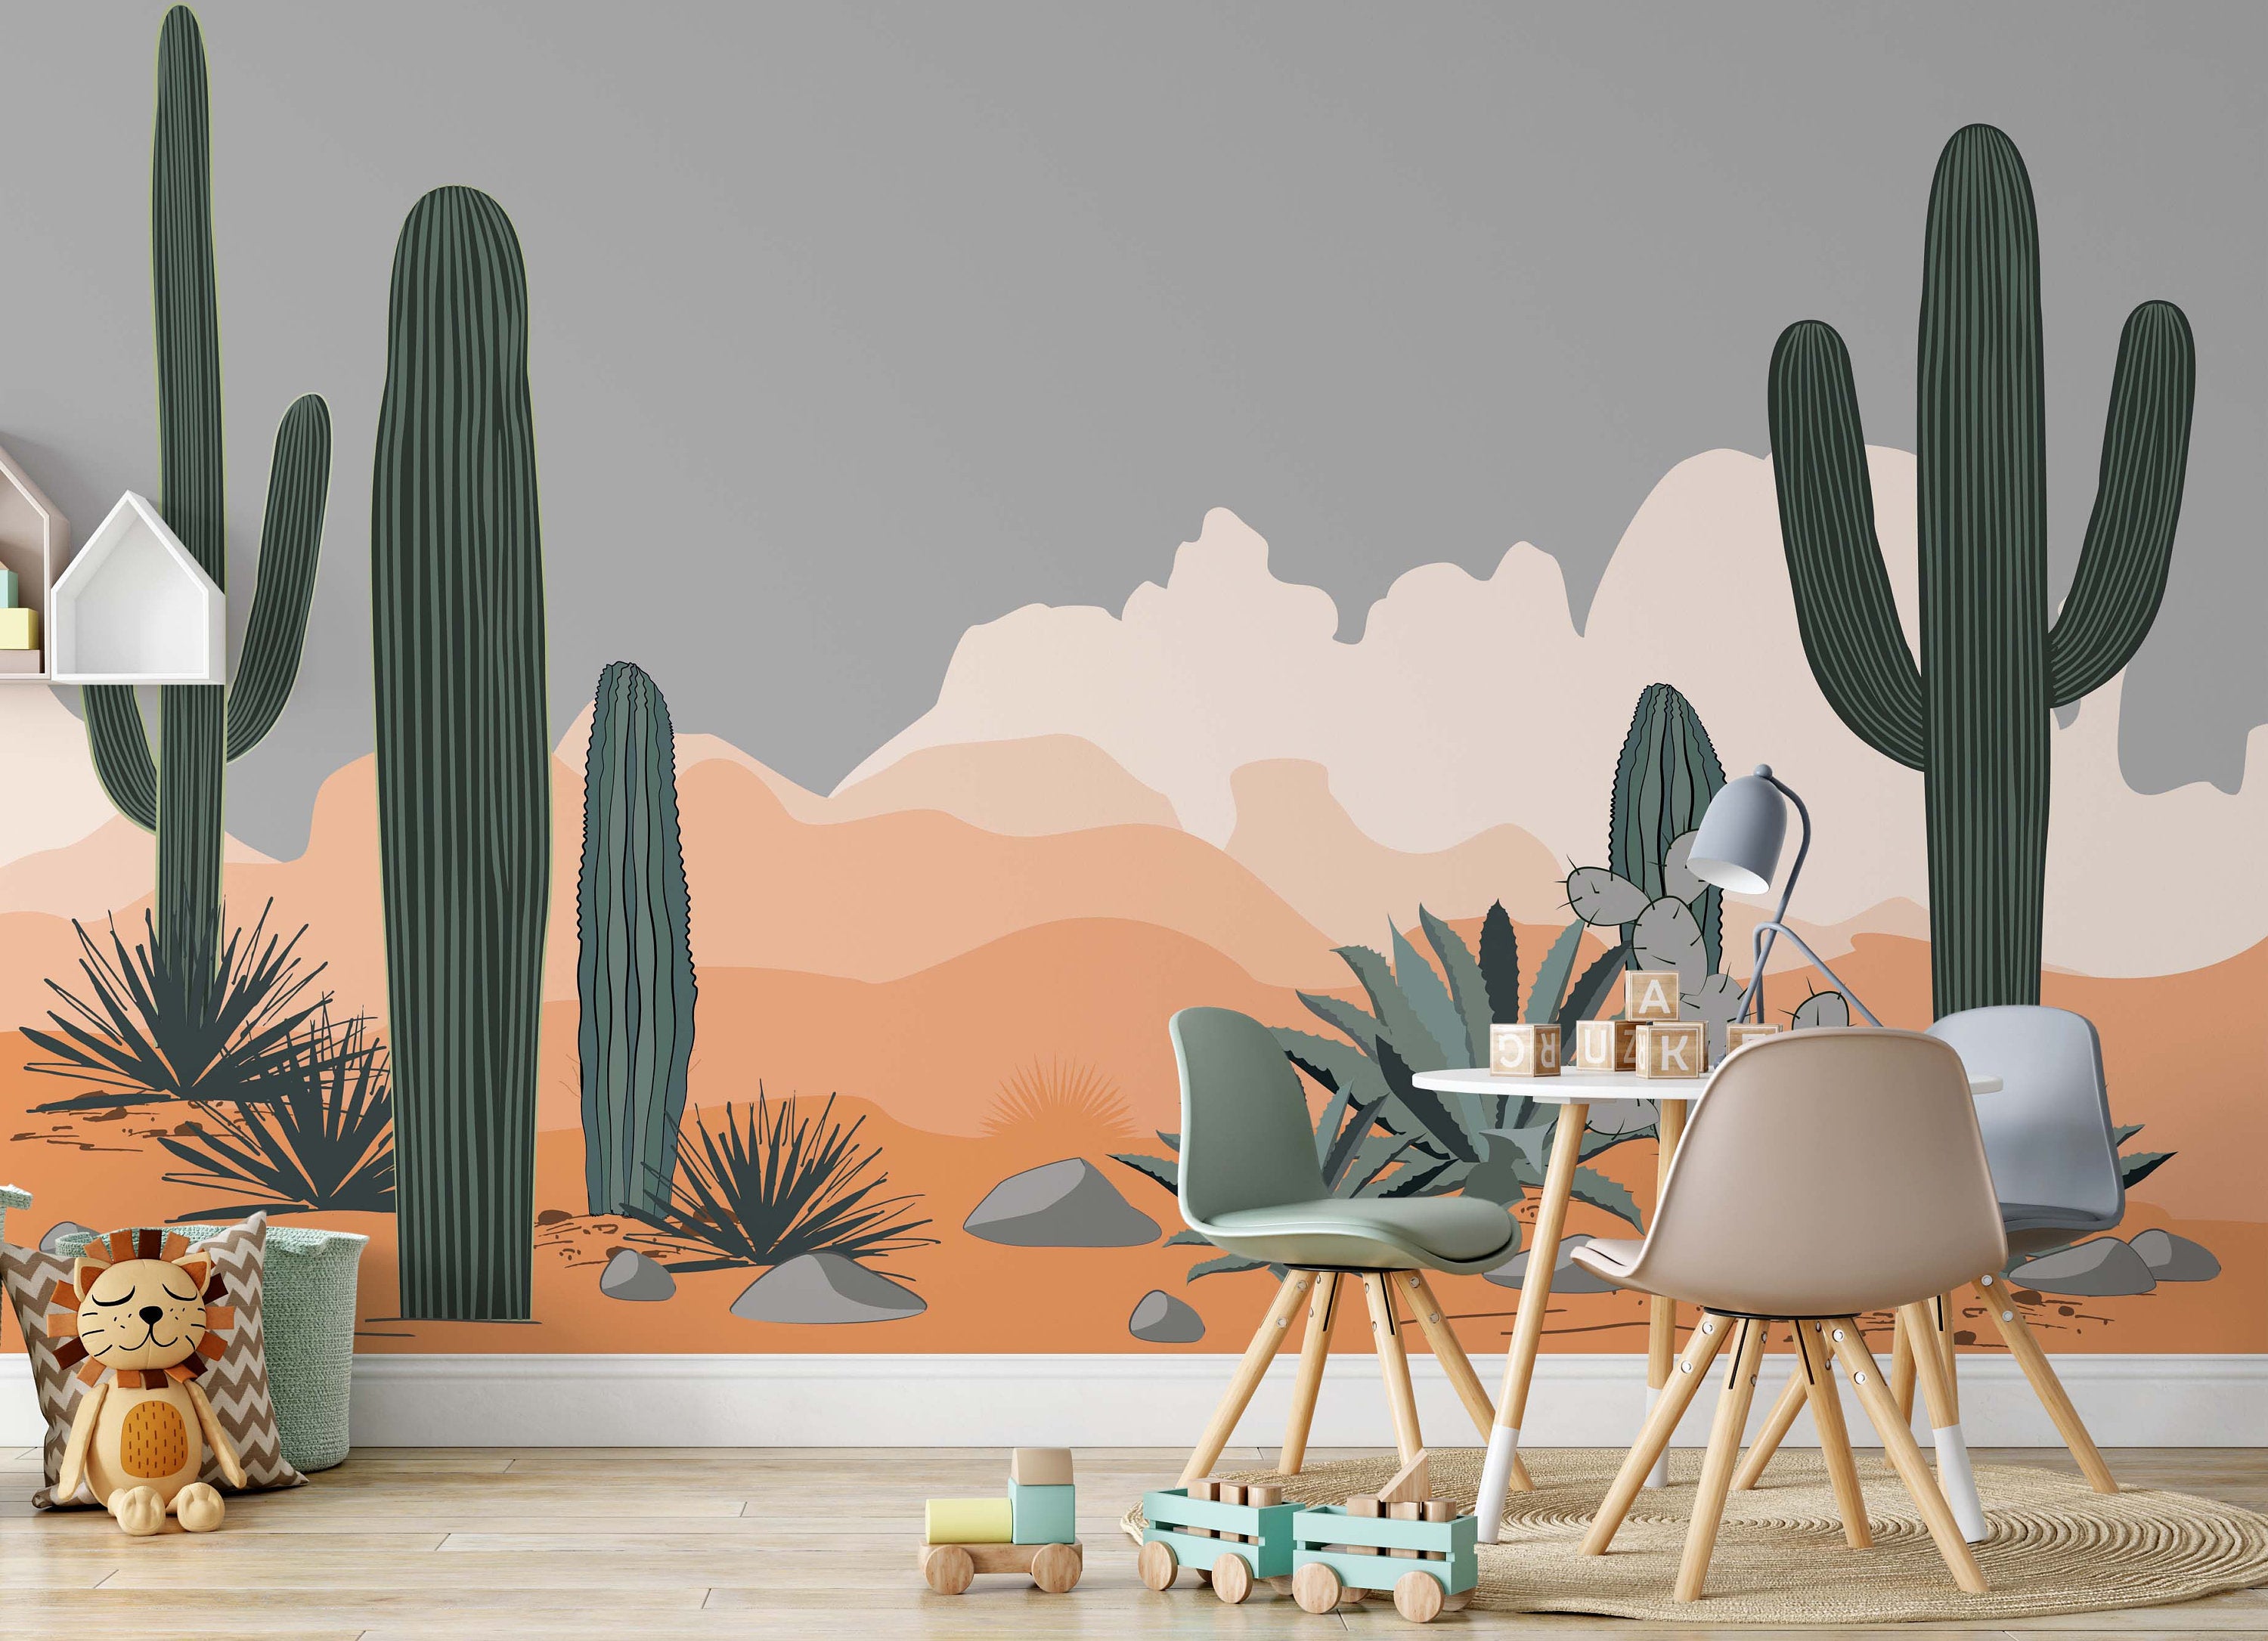 Desert Agave and Saguaro Cacti Mountains Background Wallpaper Nursery Children Kids Room Mural Home Decor Wall Art Removable